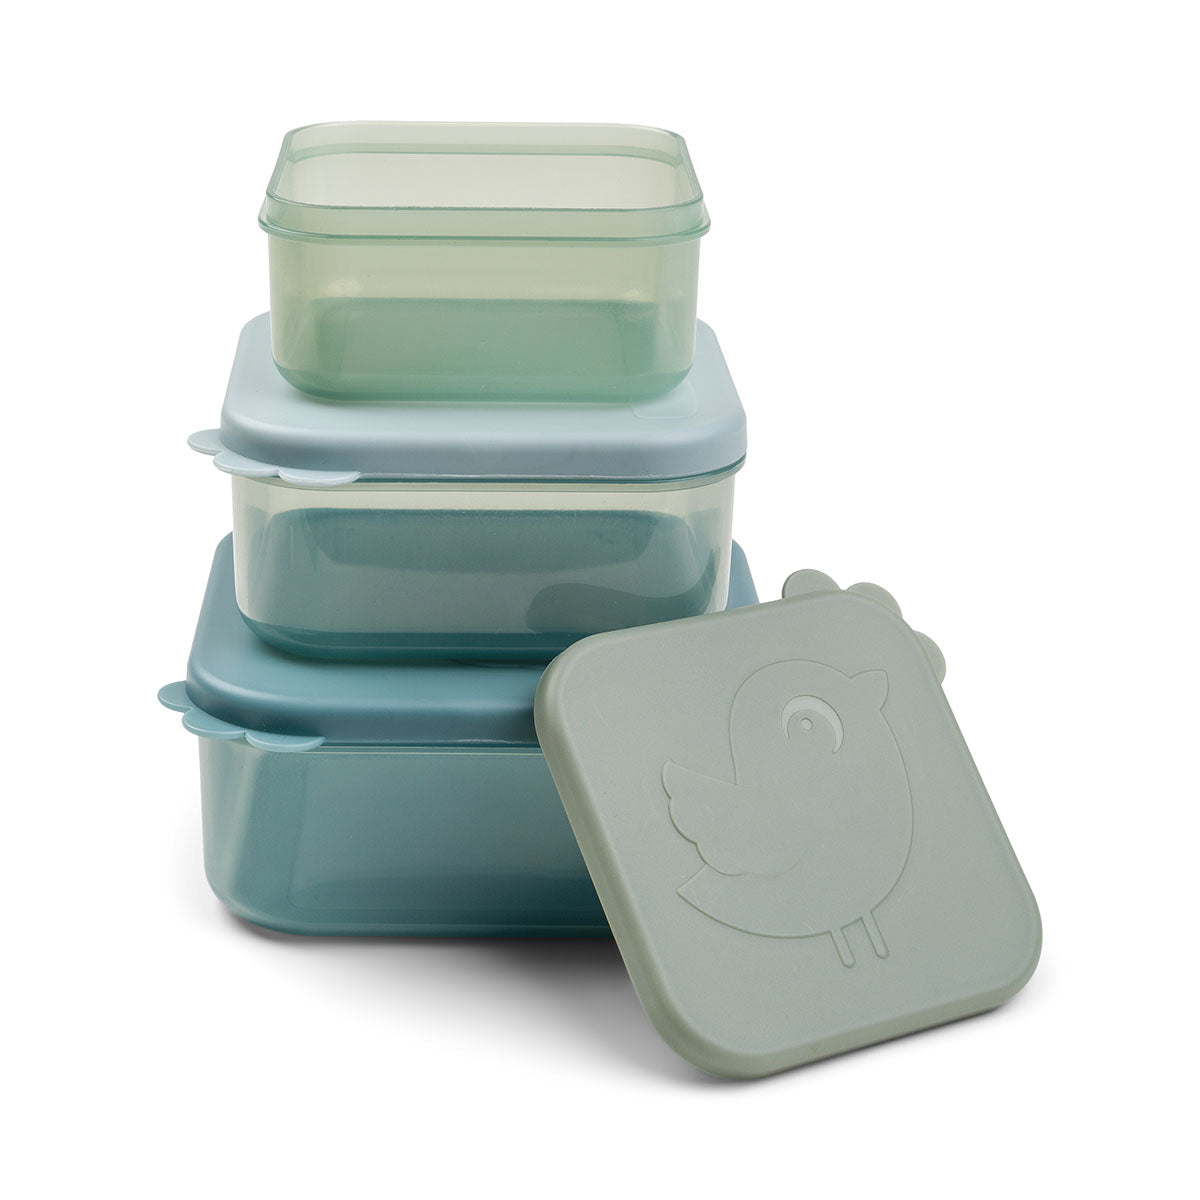 Food storage for kids and household - Dishwasher safe - Done by